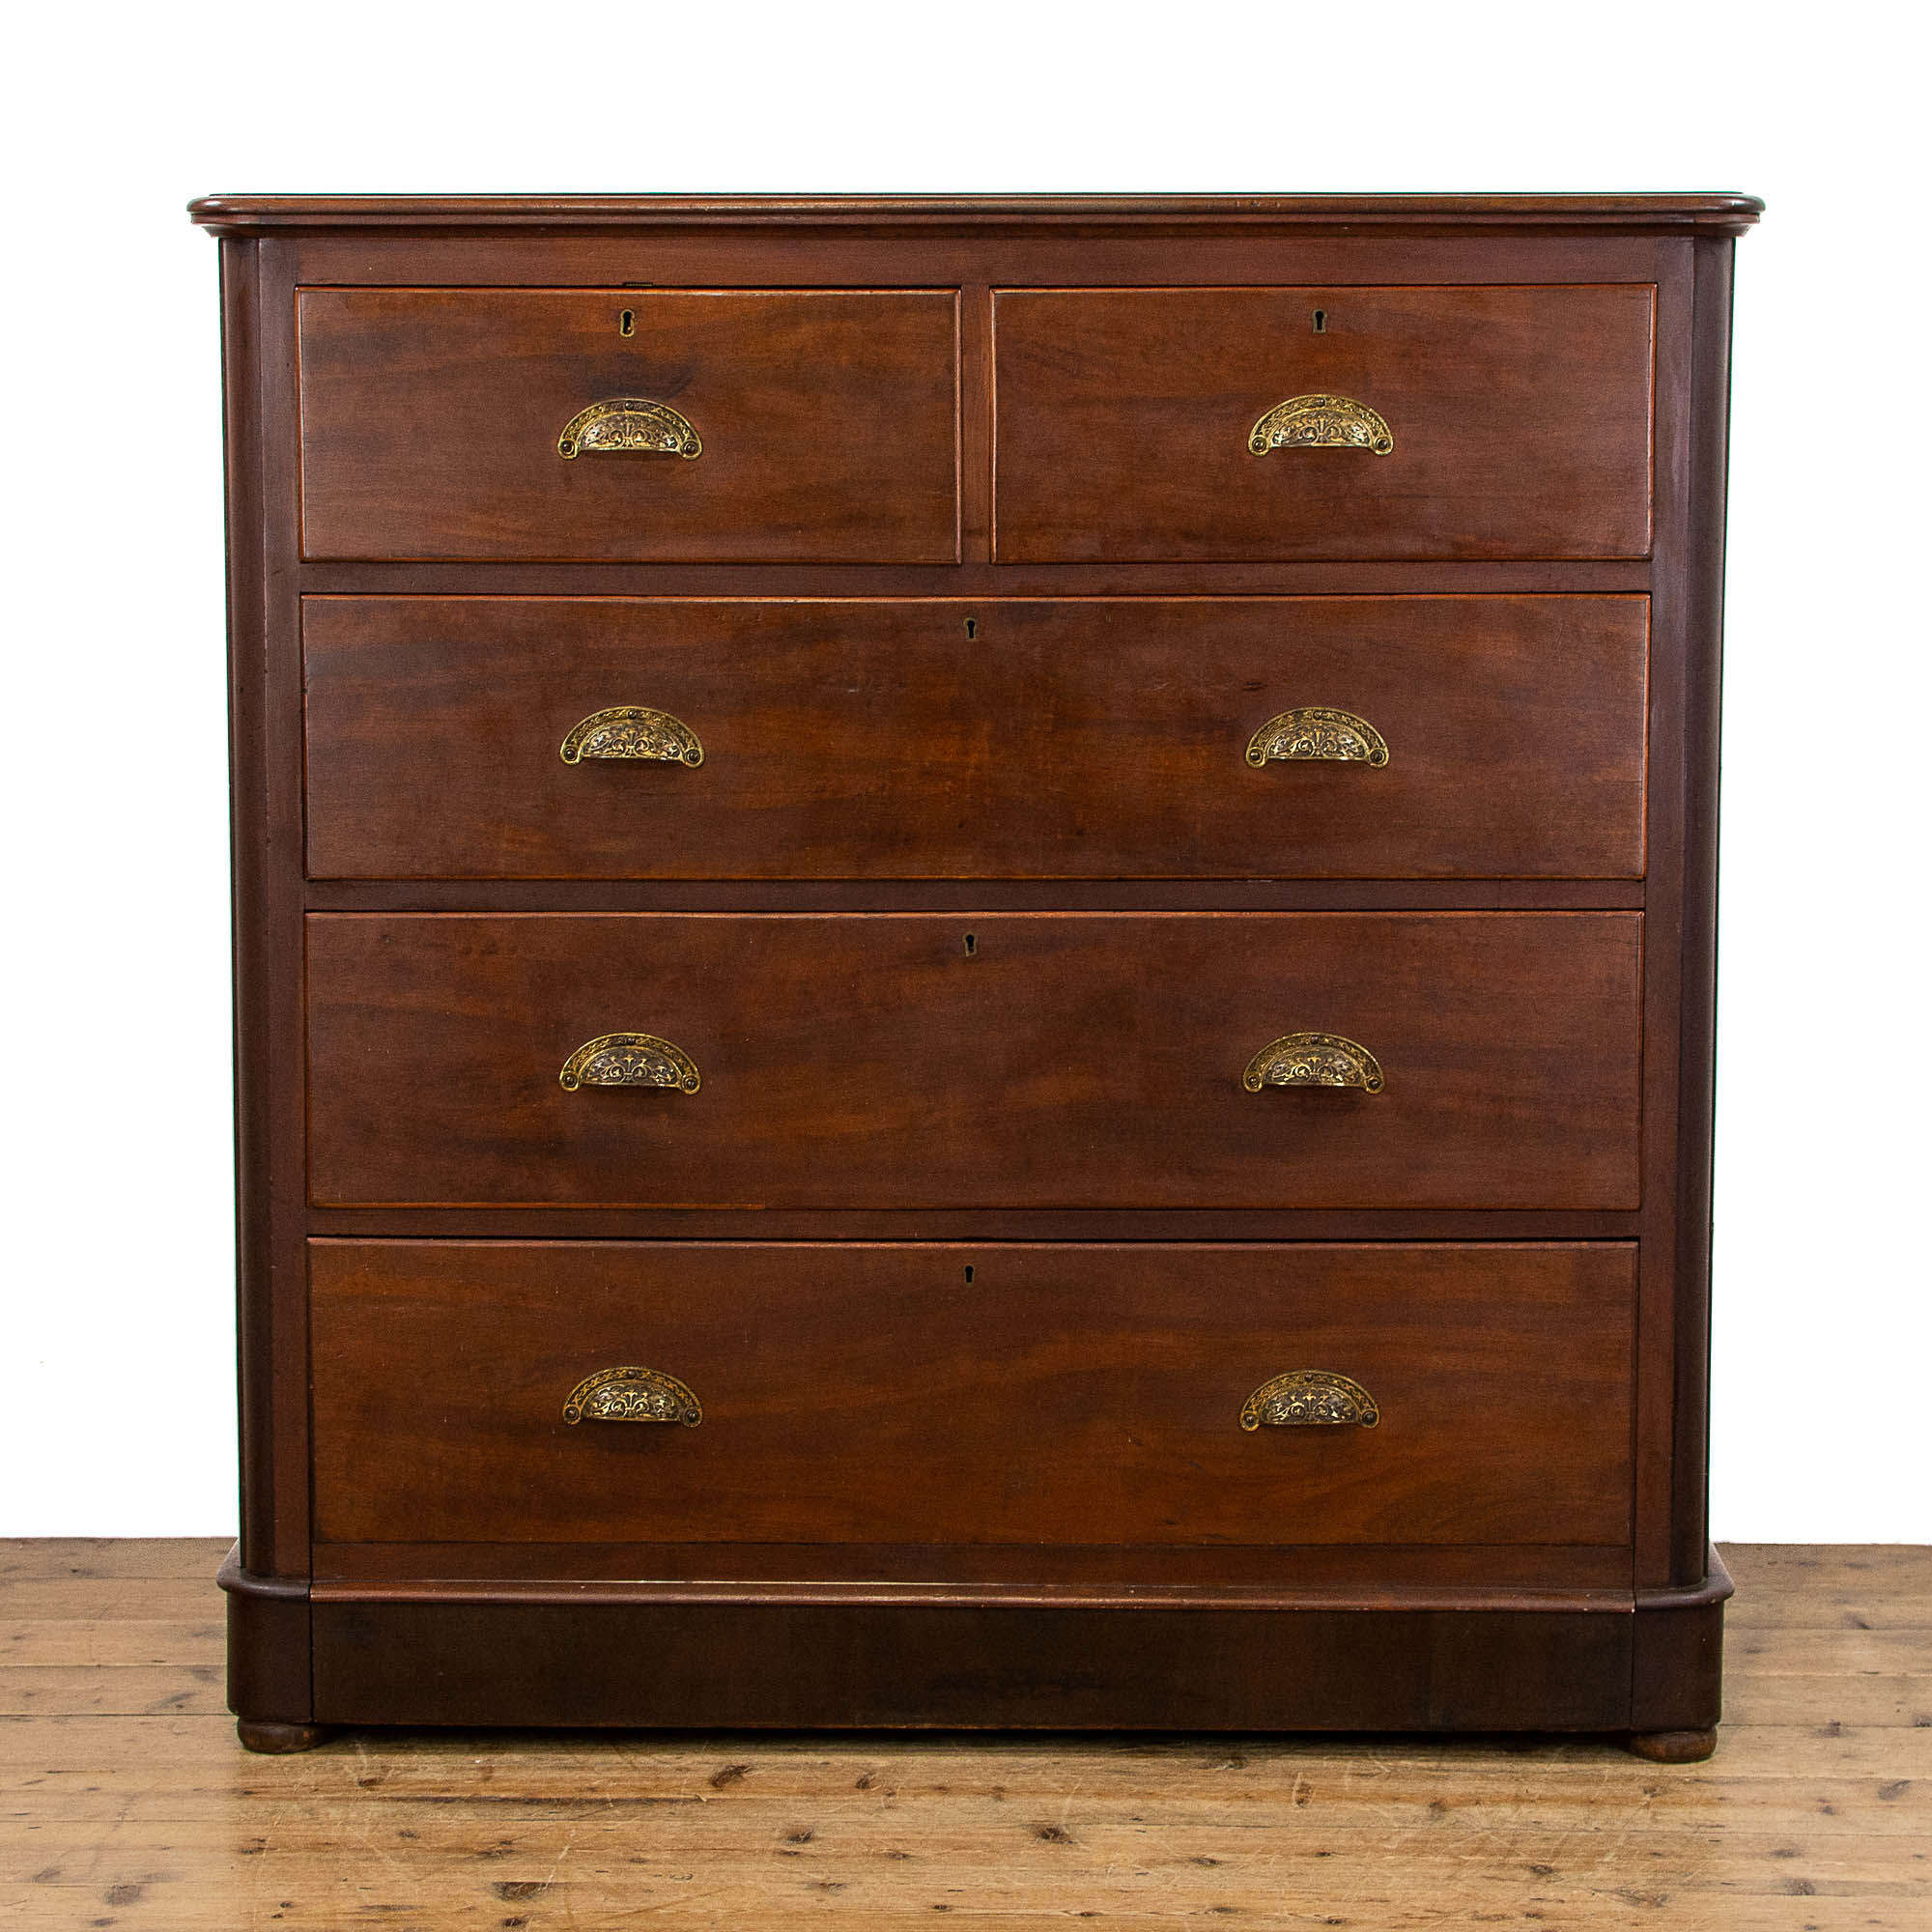 Victorian Antique Mahogany Chest Of Drawers